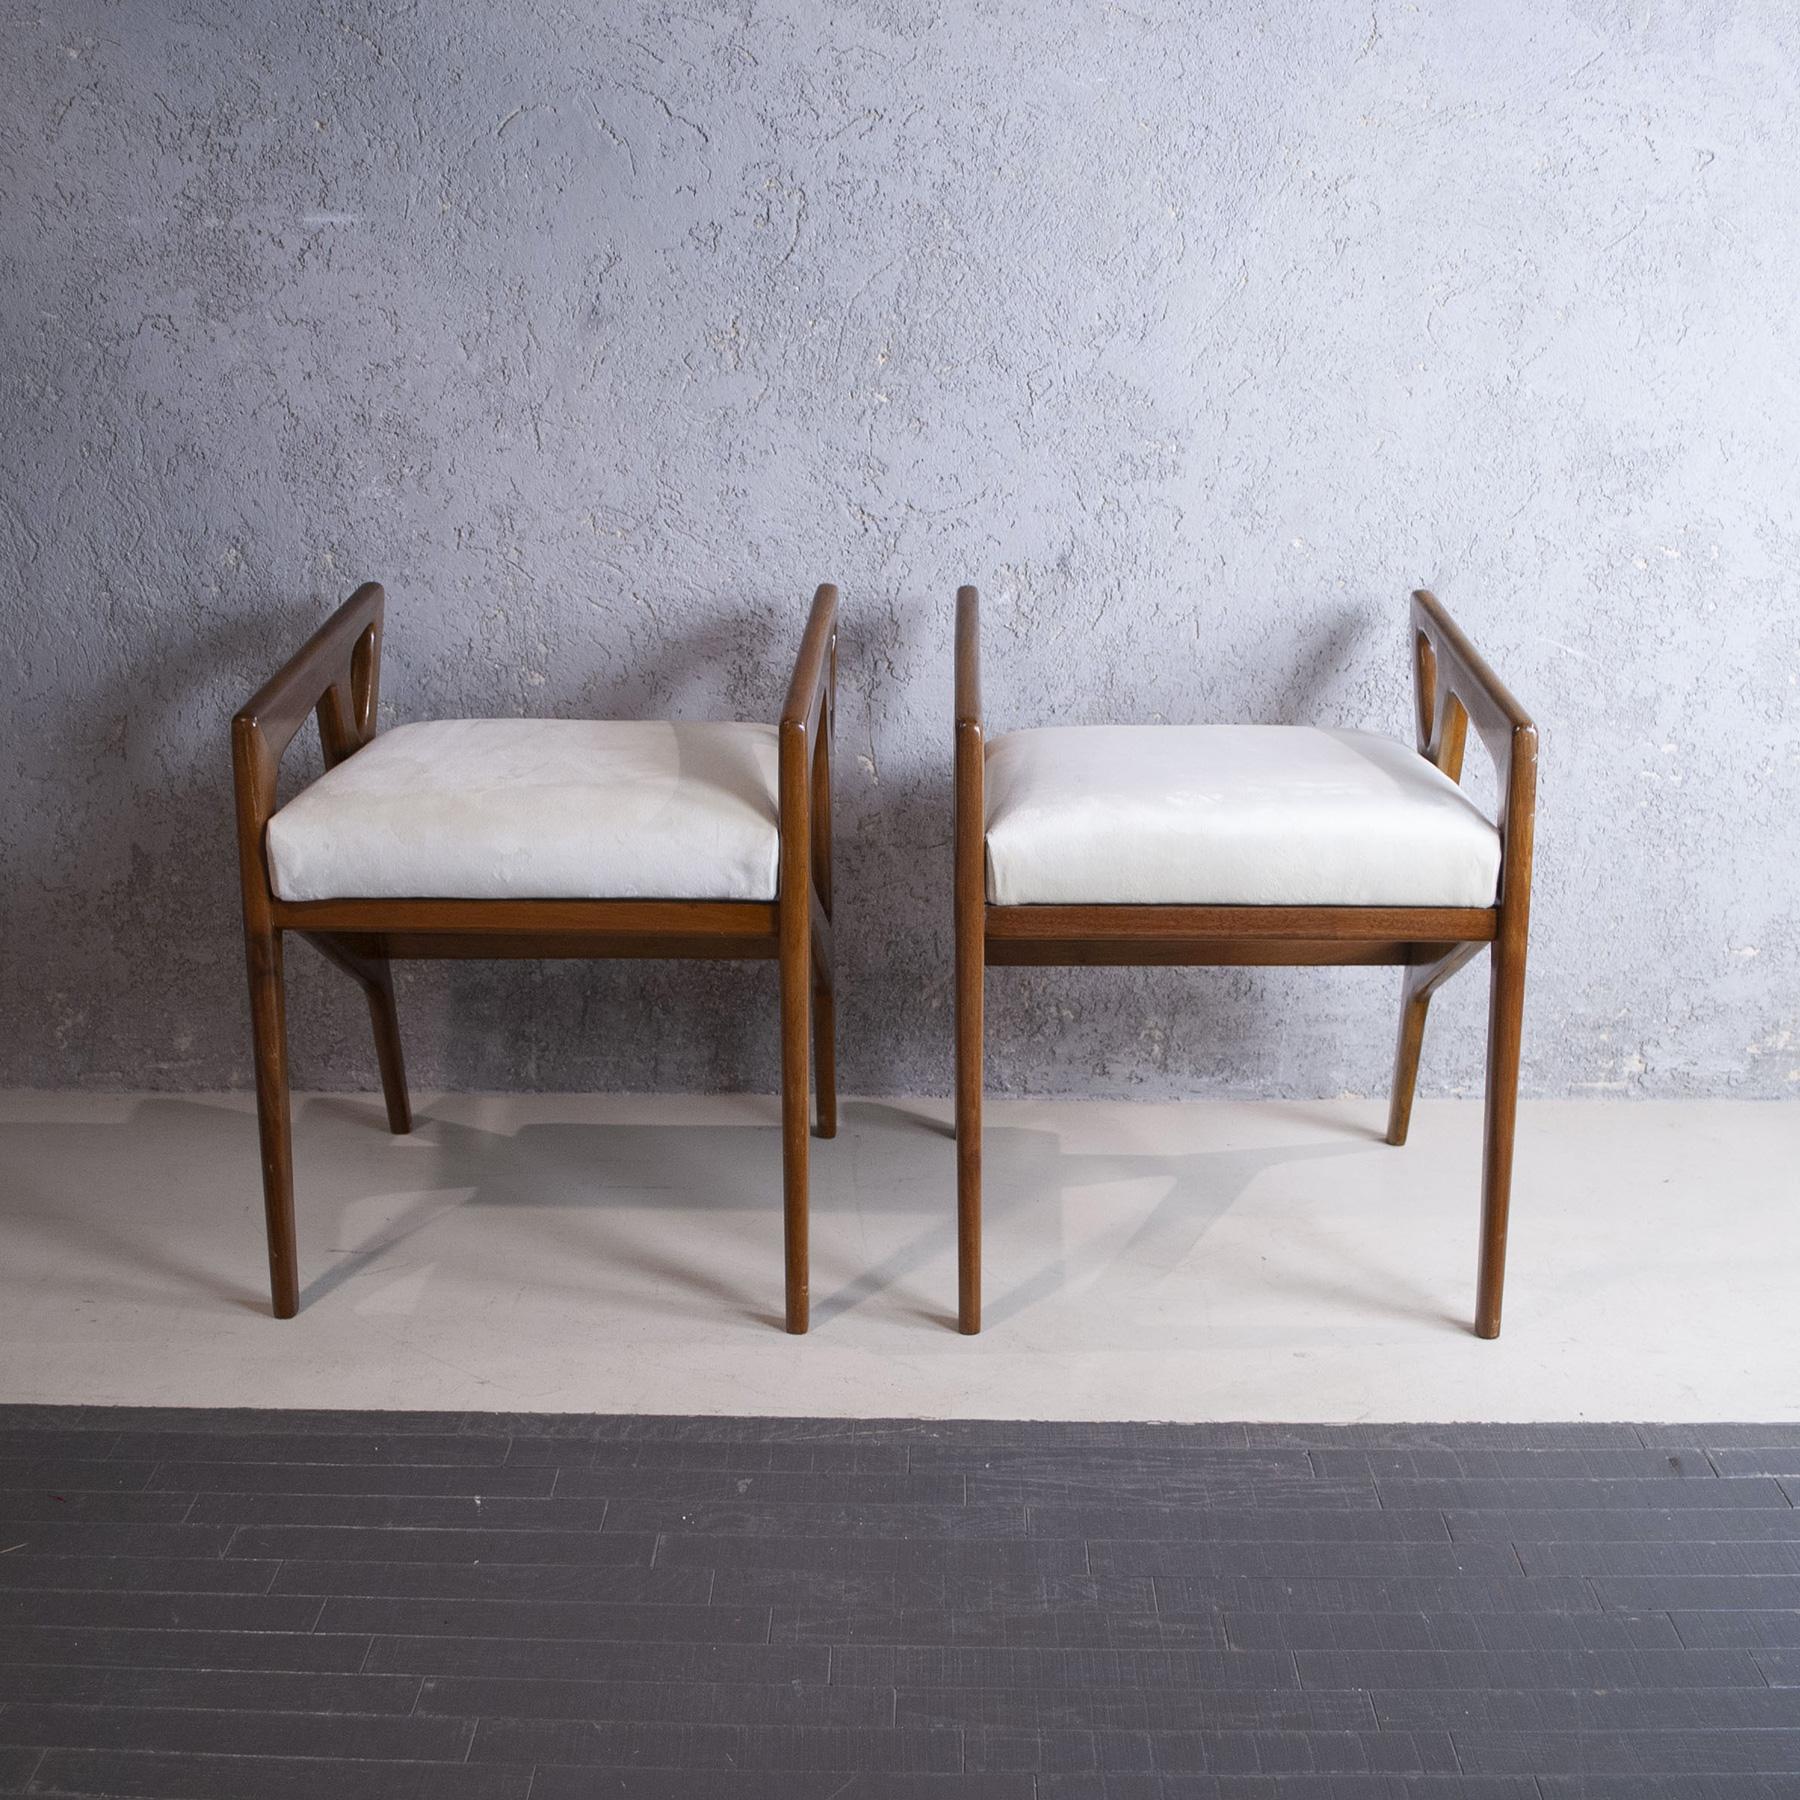 Bar stools 1950s wooden frame designer Gio Ponti.

Gio Ponti was born in Milan in 1891. He graduated in architecture in 1921 and from 1923 began his work as a designer for the Richard Ginori ceramics industry, where he revamped production.
It was